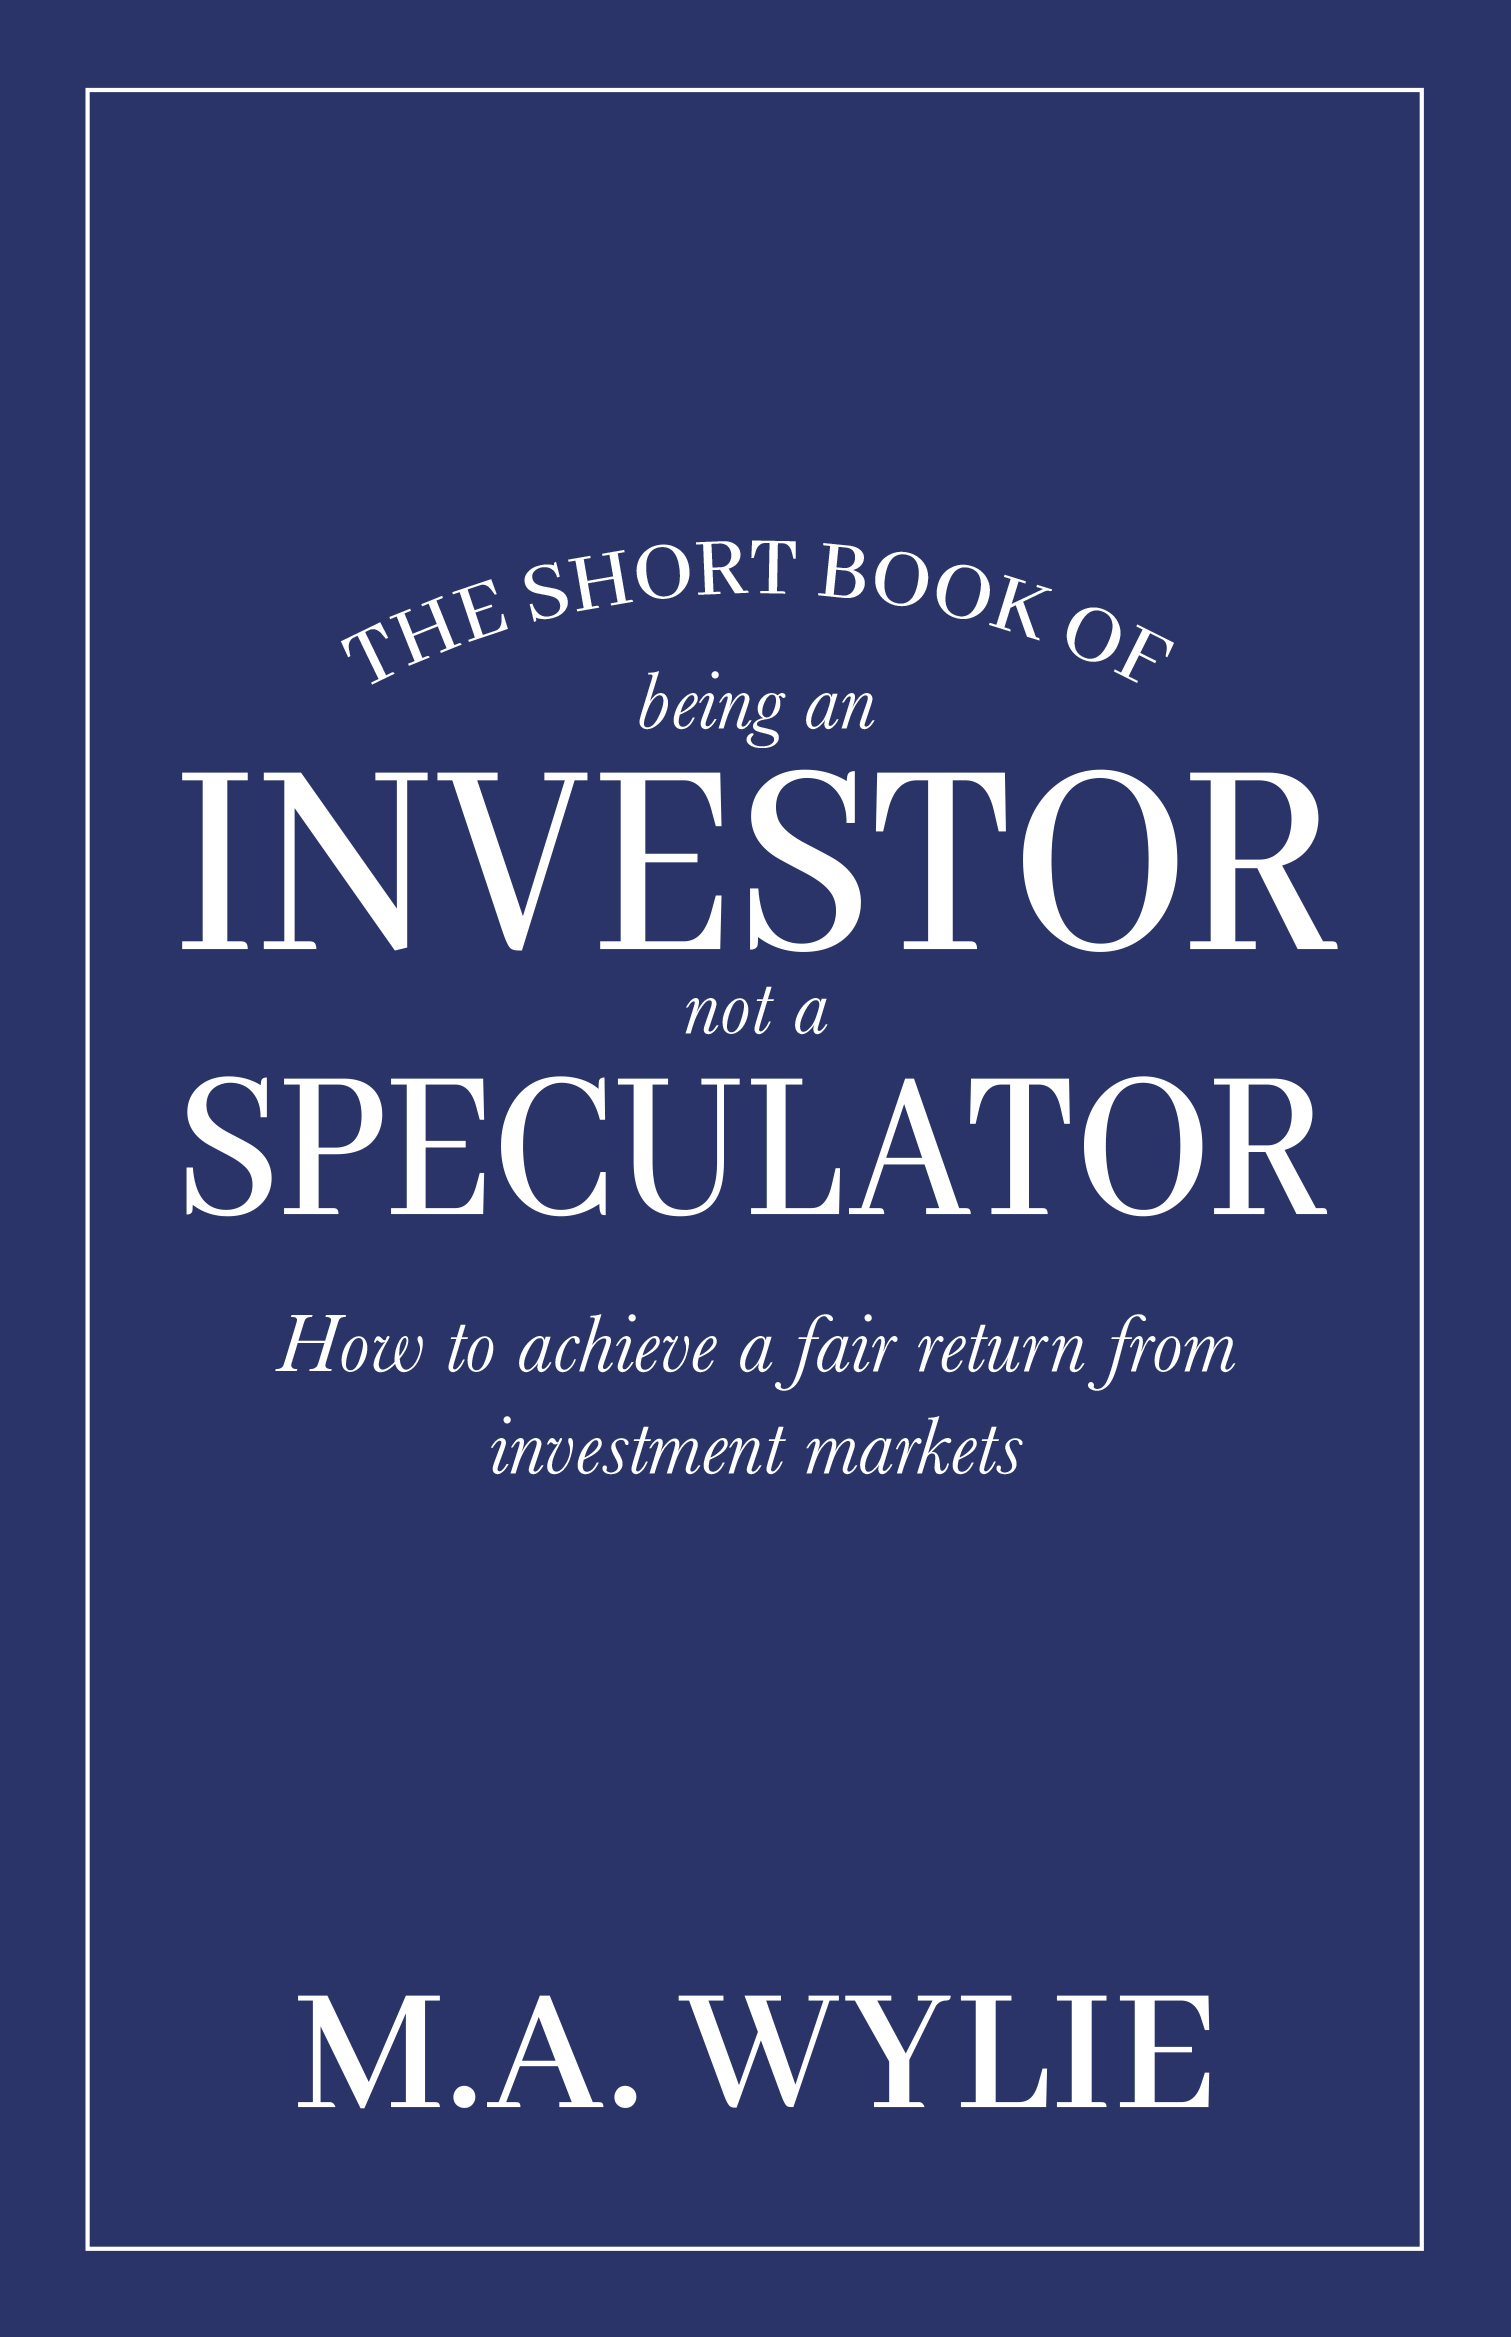 The Short Book of Being an Investor not a Speculator cover.jpg